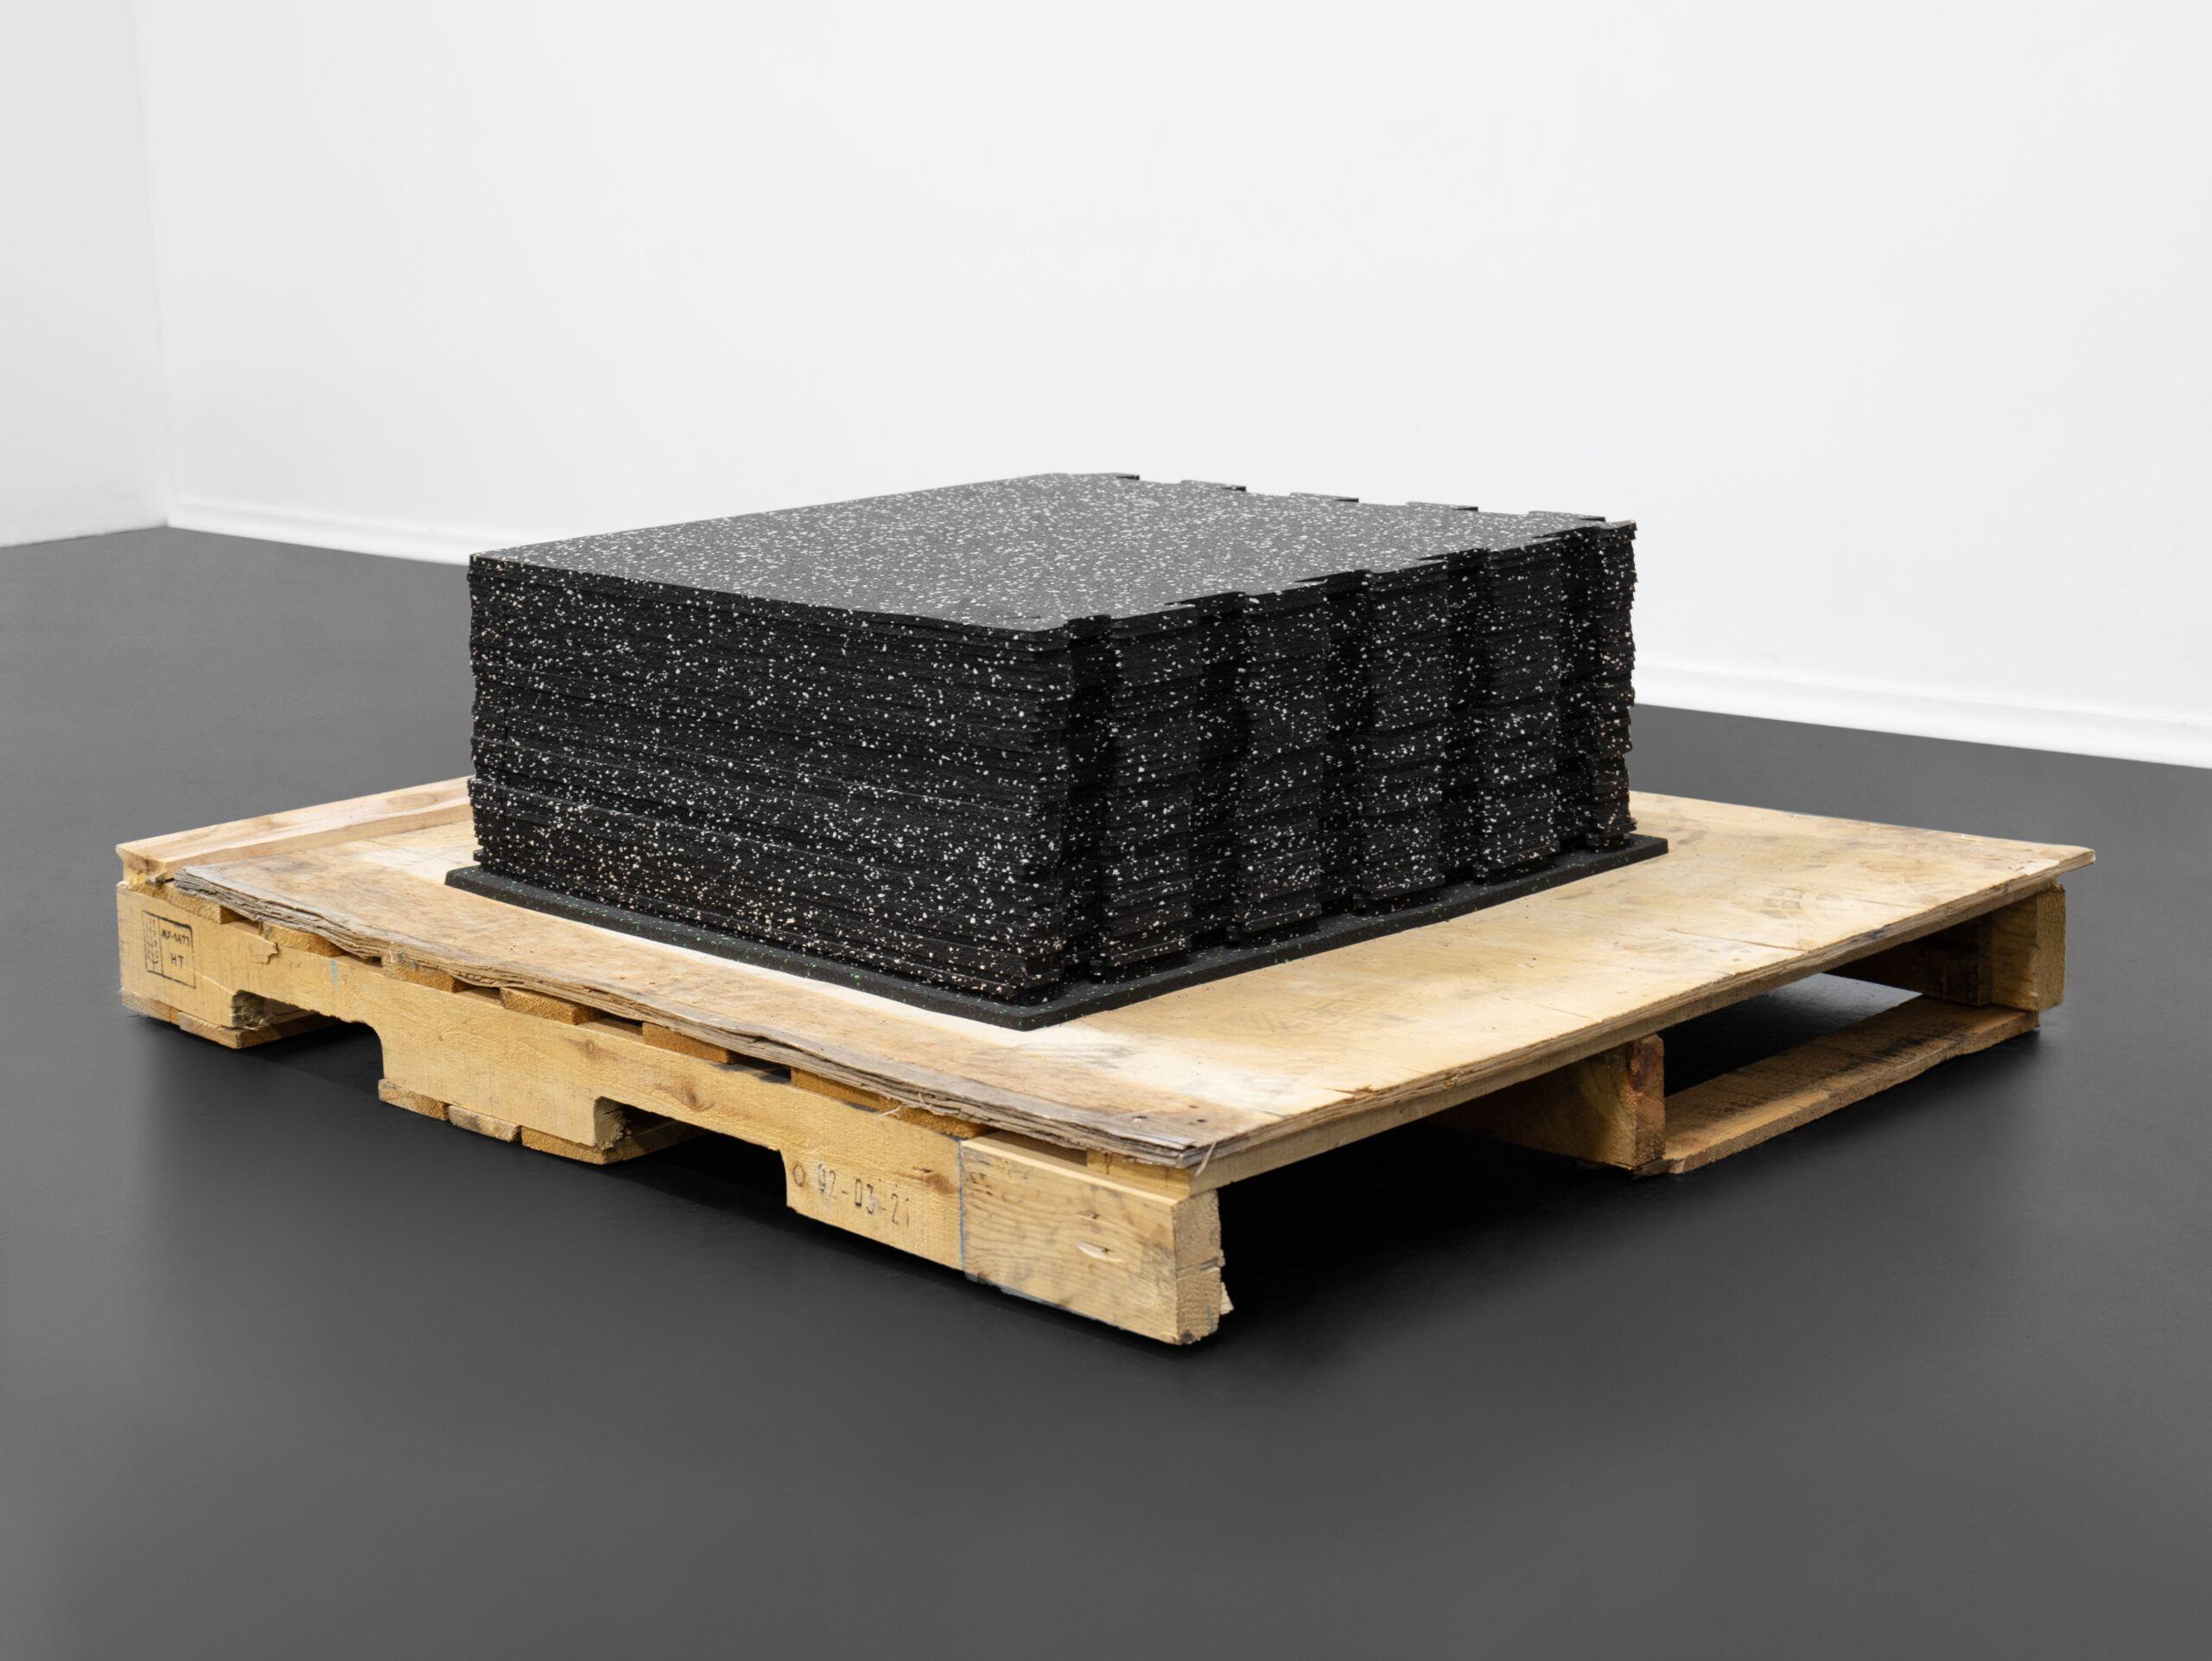 Commercial grade, recycled rubber gives the matting added strength and durability